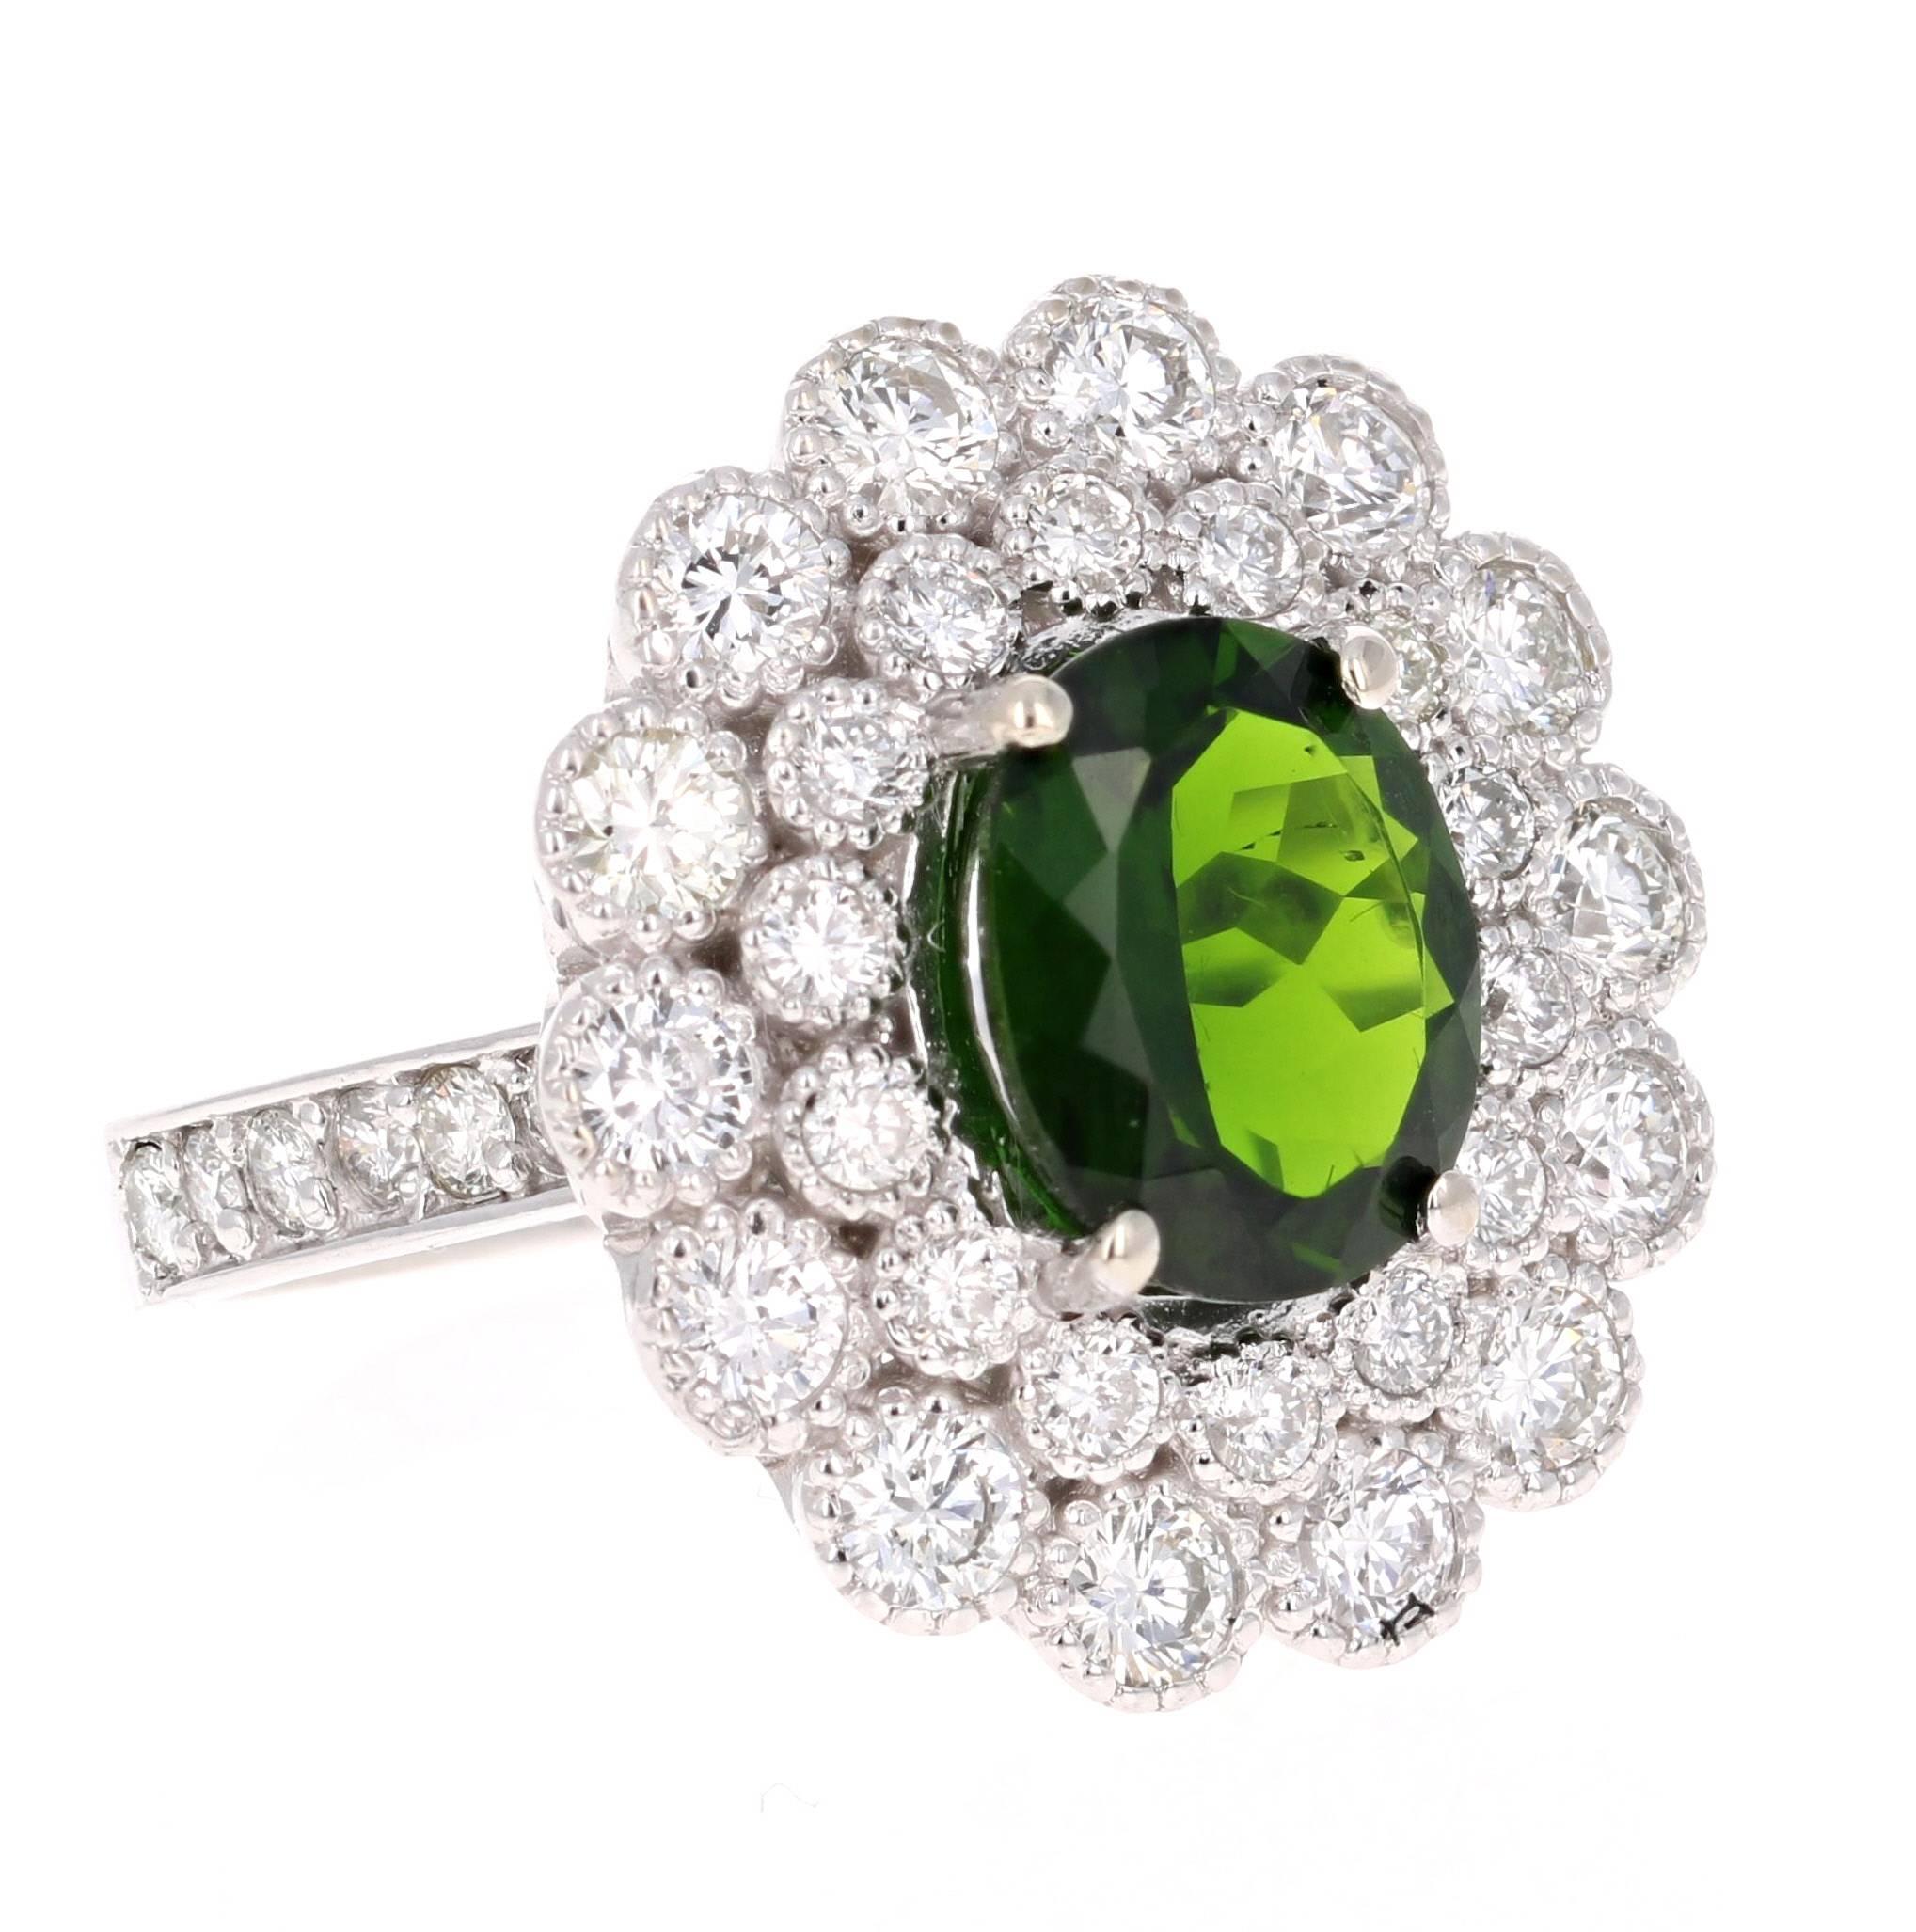 Beautifully crafted 4.51 Carat Chrome Diopside Diamond White Gold Cocktail Ring!

Chrome Diopside is a natural gemstone that comes from Russia.   It is  known to be the affordable alternative to Emeralds and Tsavorites and is quickly becoming quite